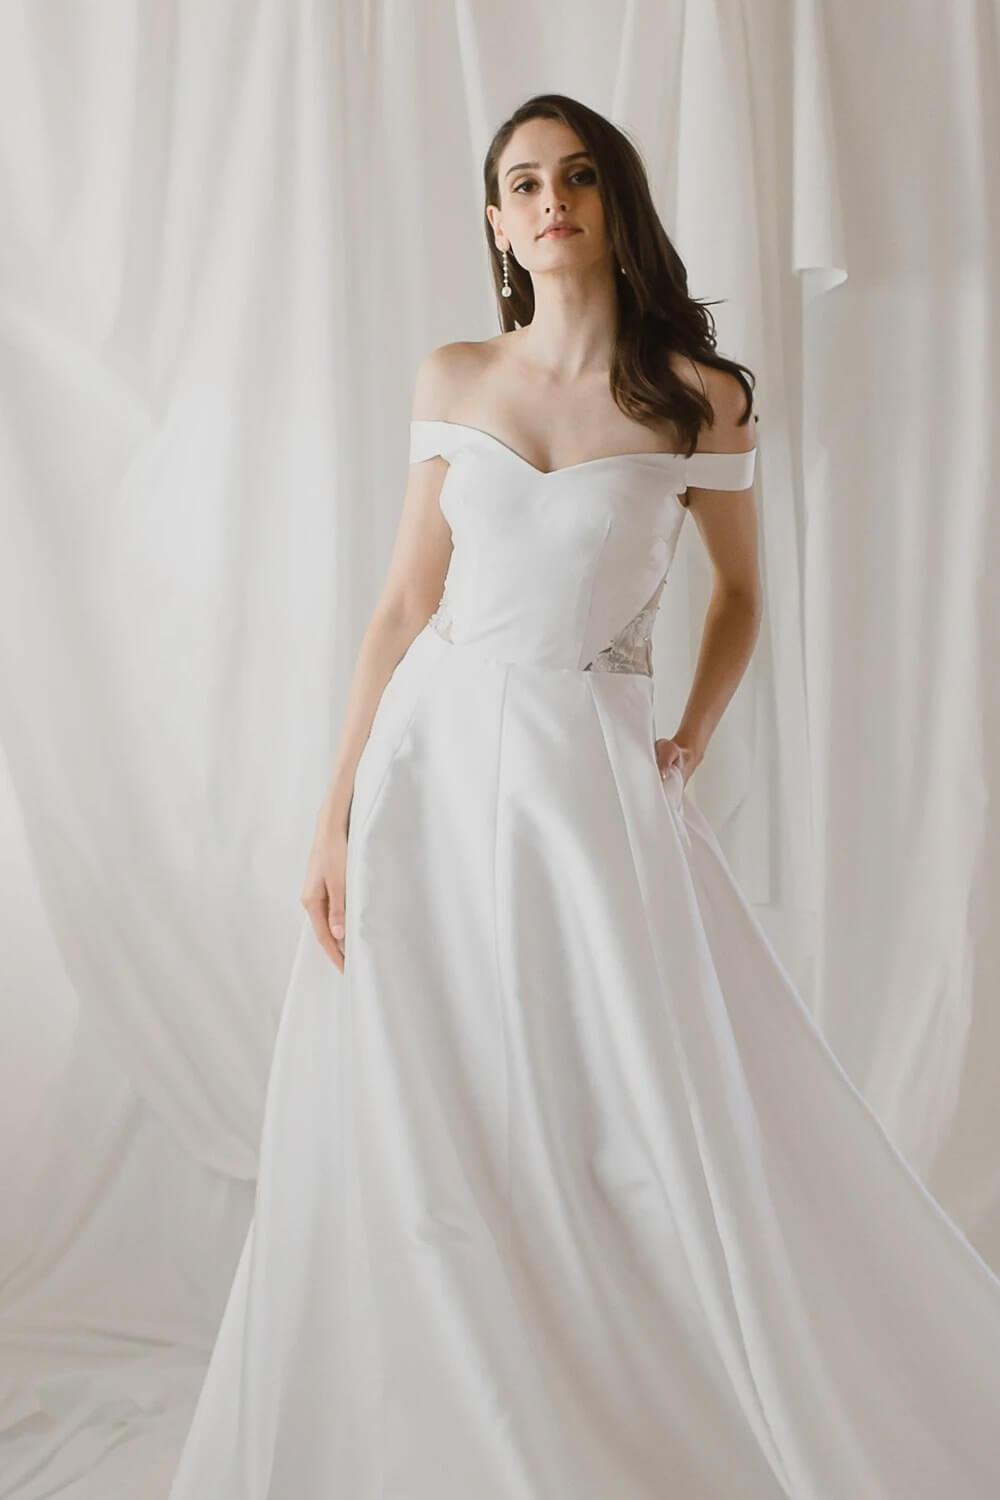 Sexy Wedding Dresses - Your Guide for the Wedding